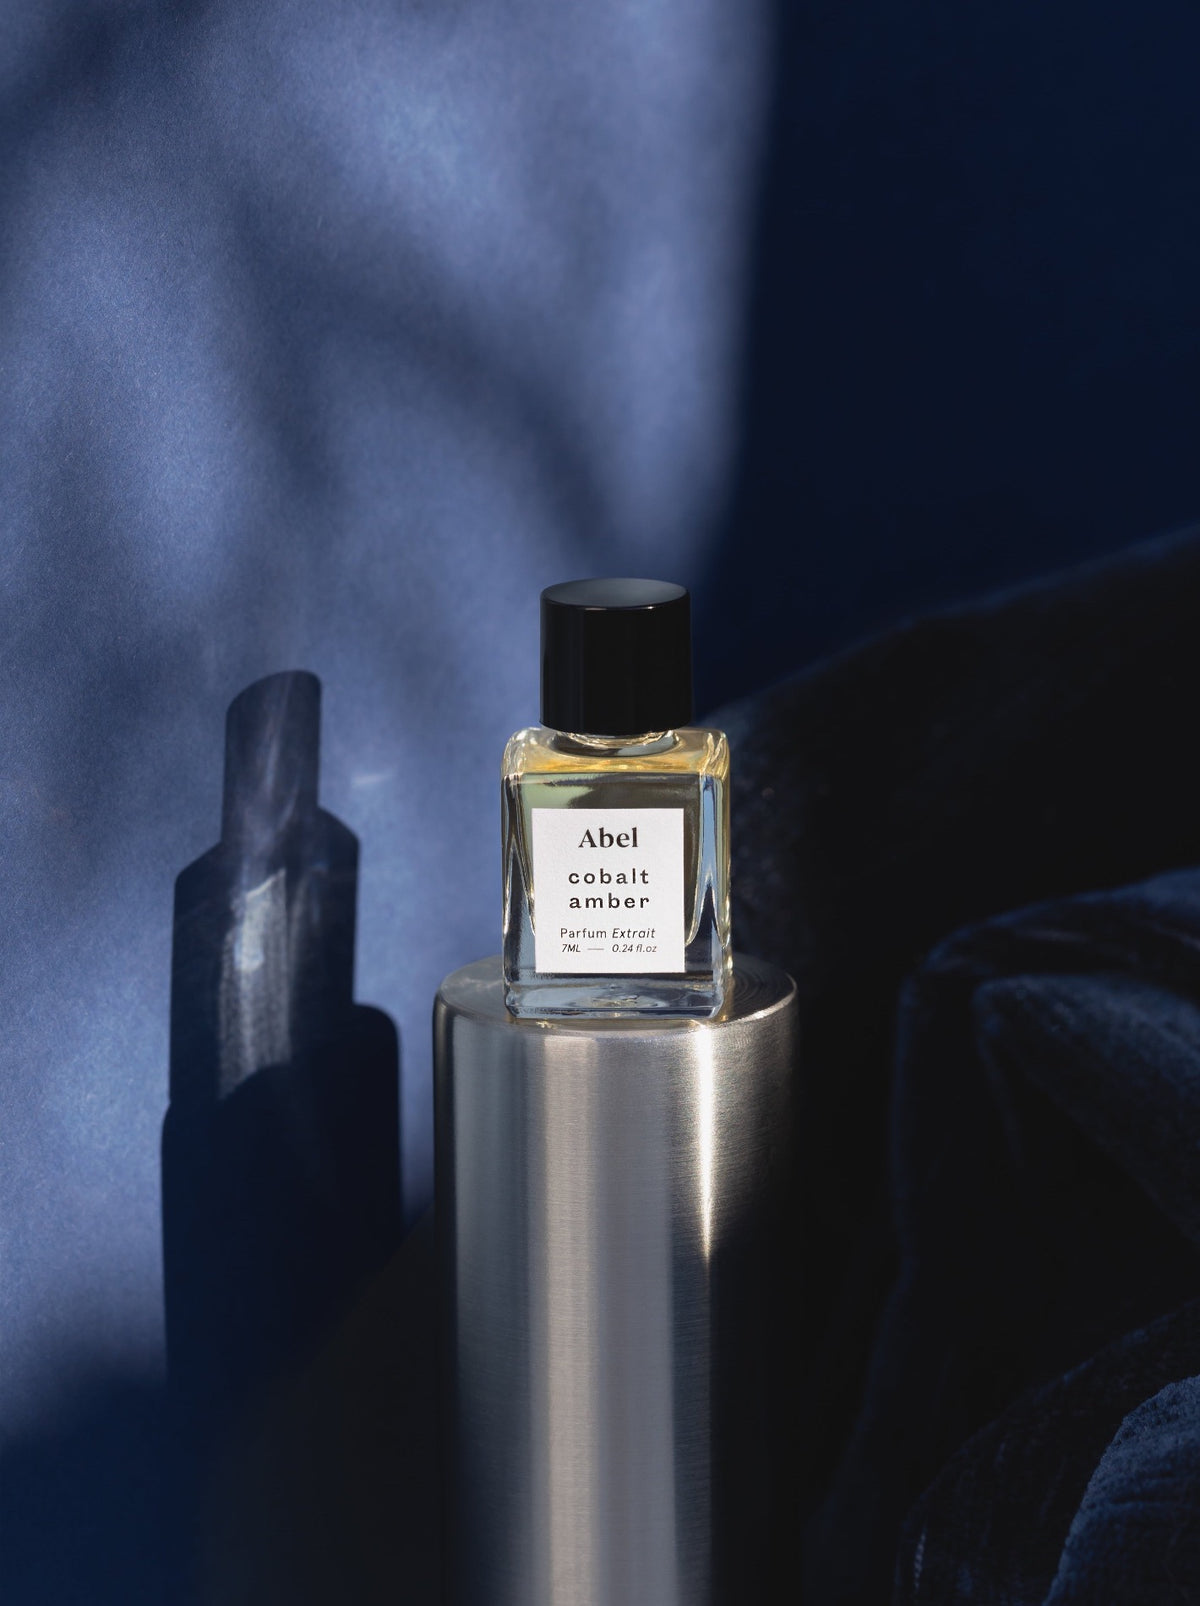 A Cobalt Amber Parfum Extrait by Abel, for comfort, sitting next to a blue background.